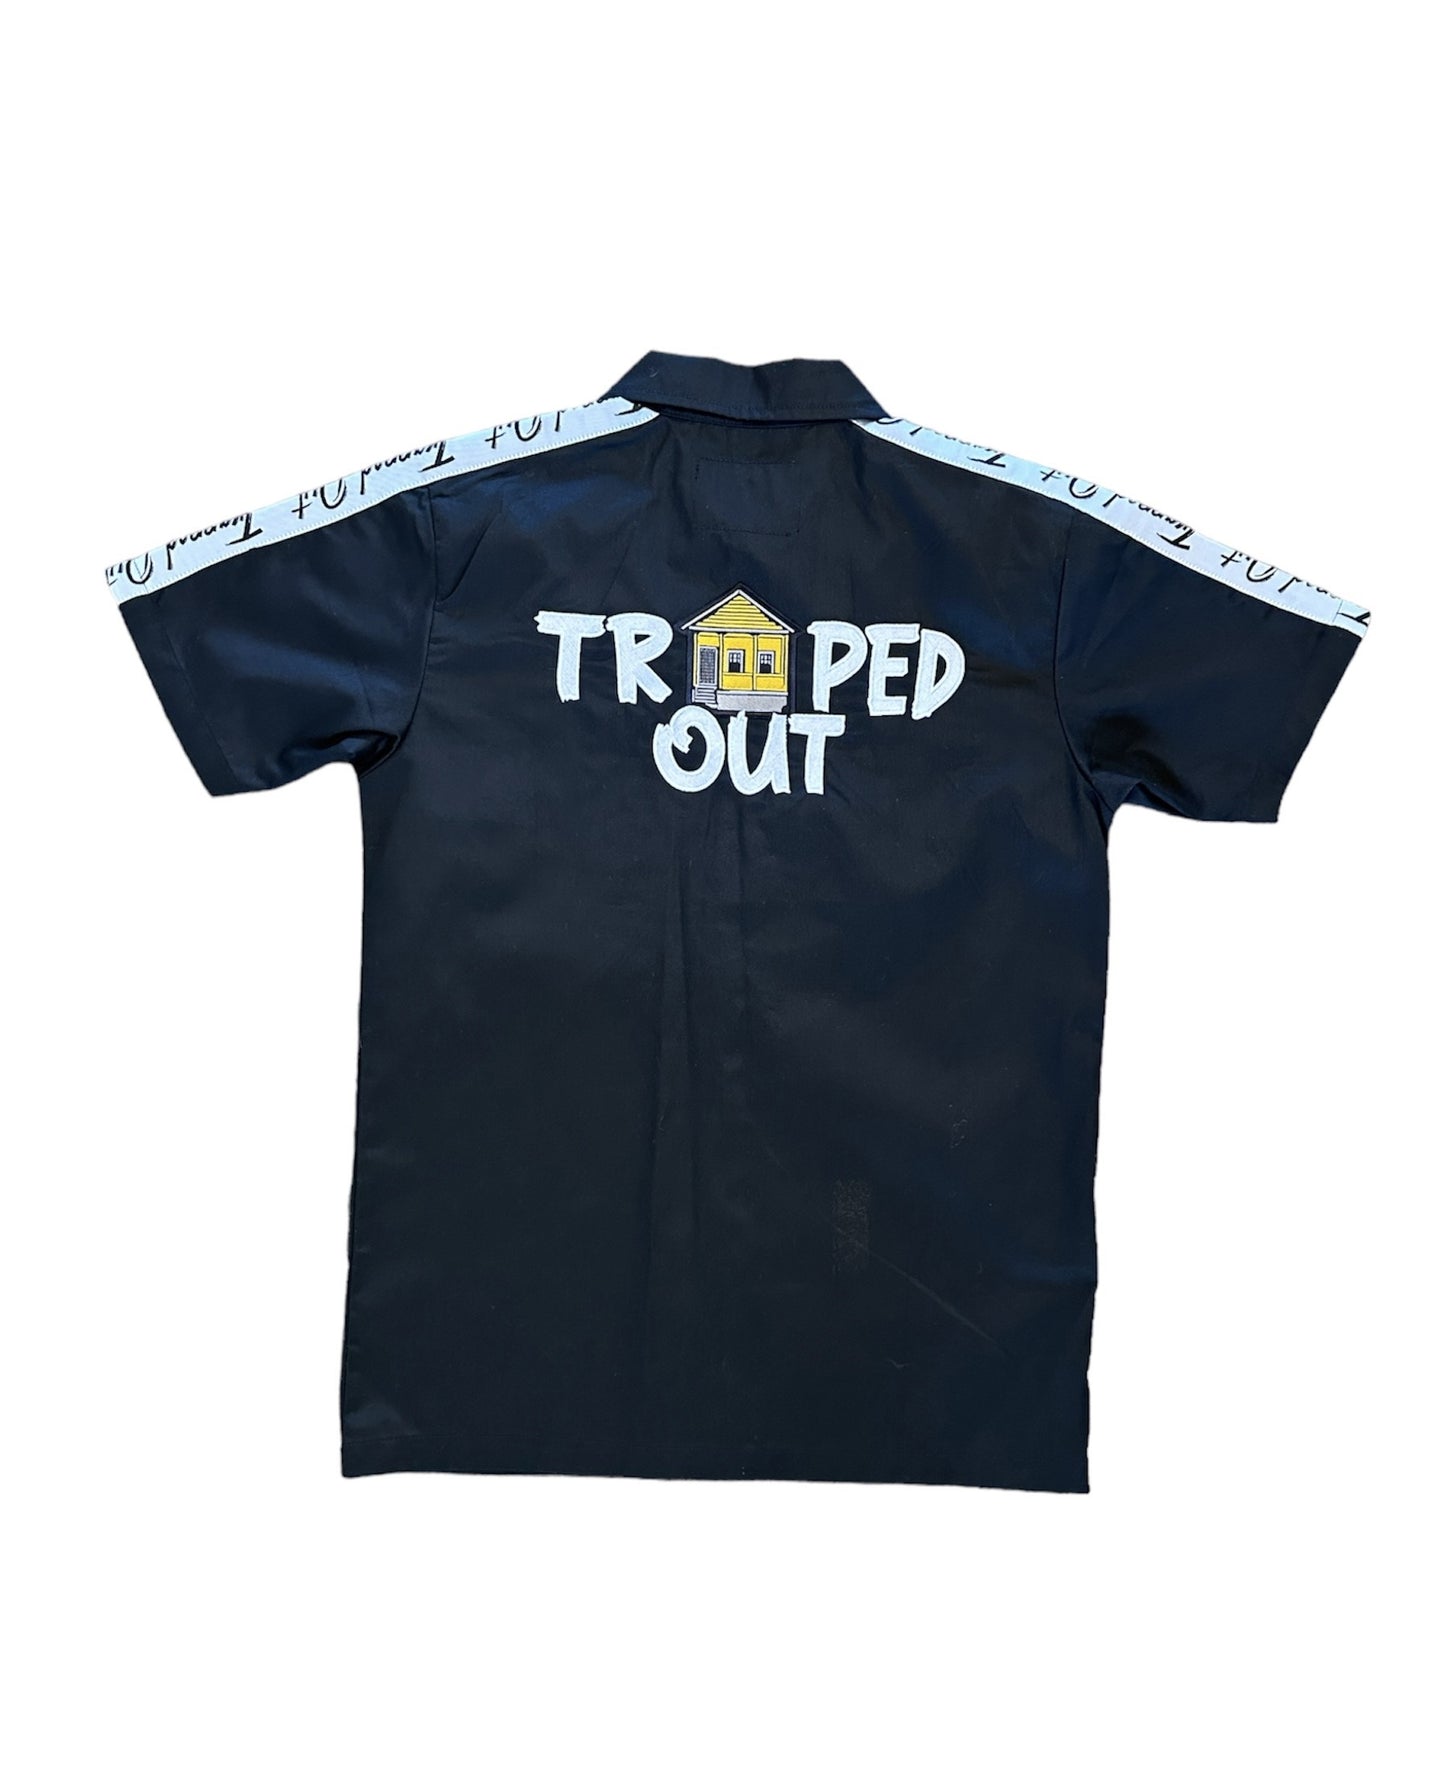 Black Short Sleeve Trapped Out Dickie Shirt